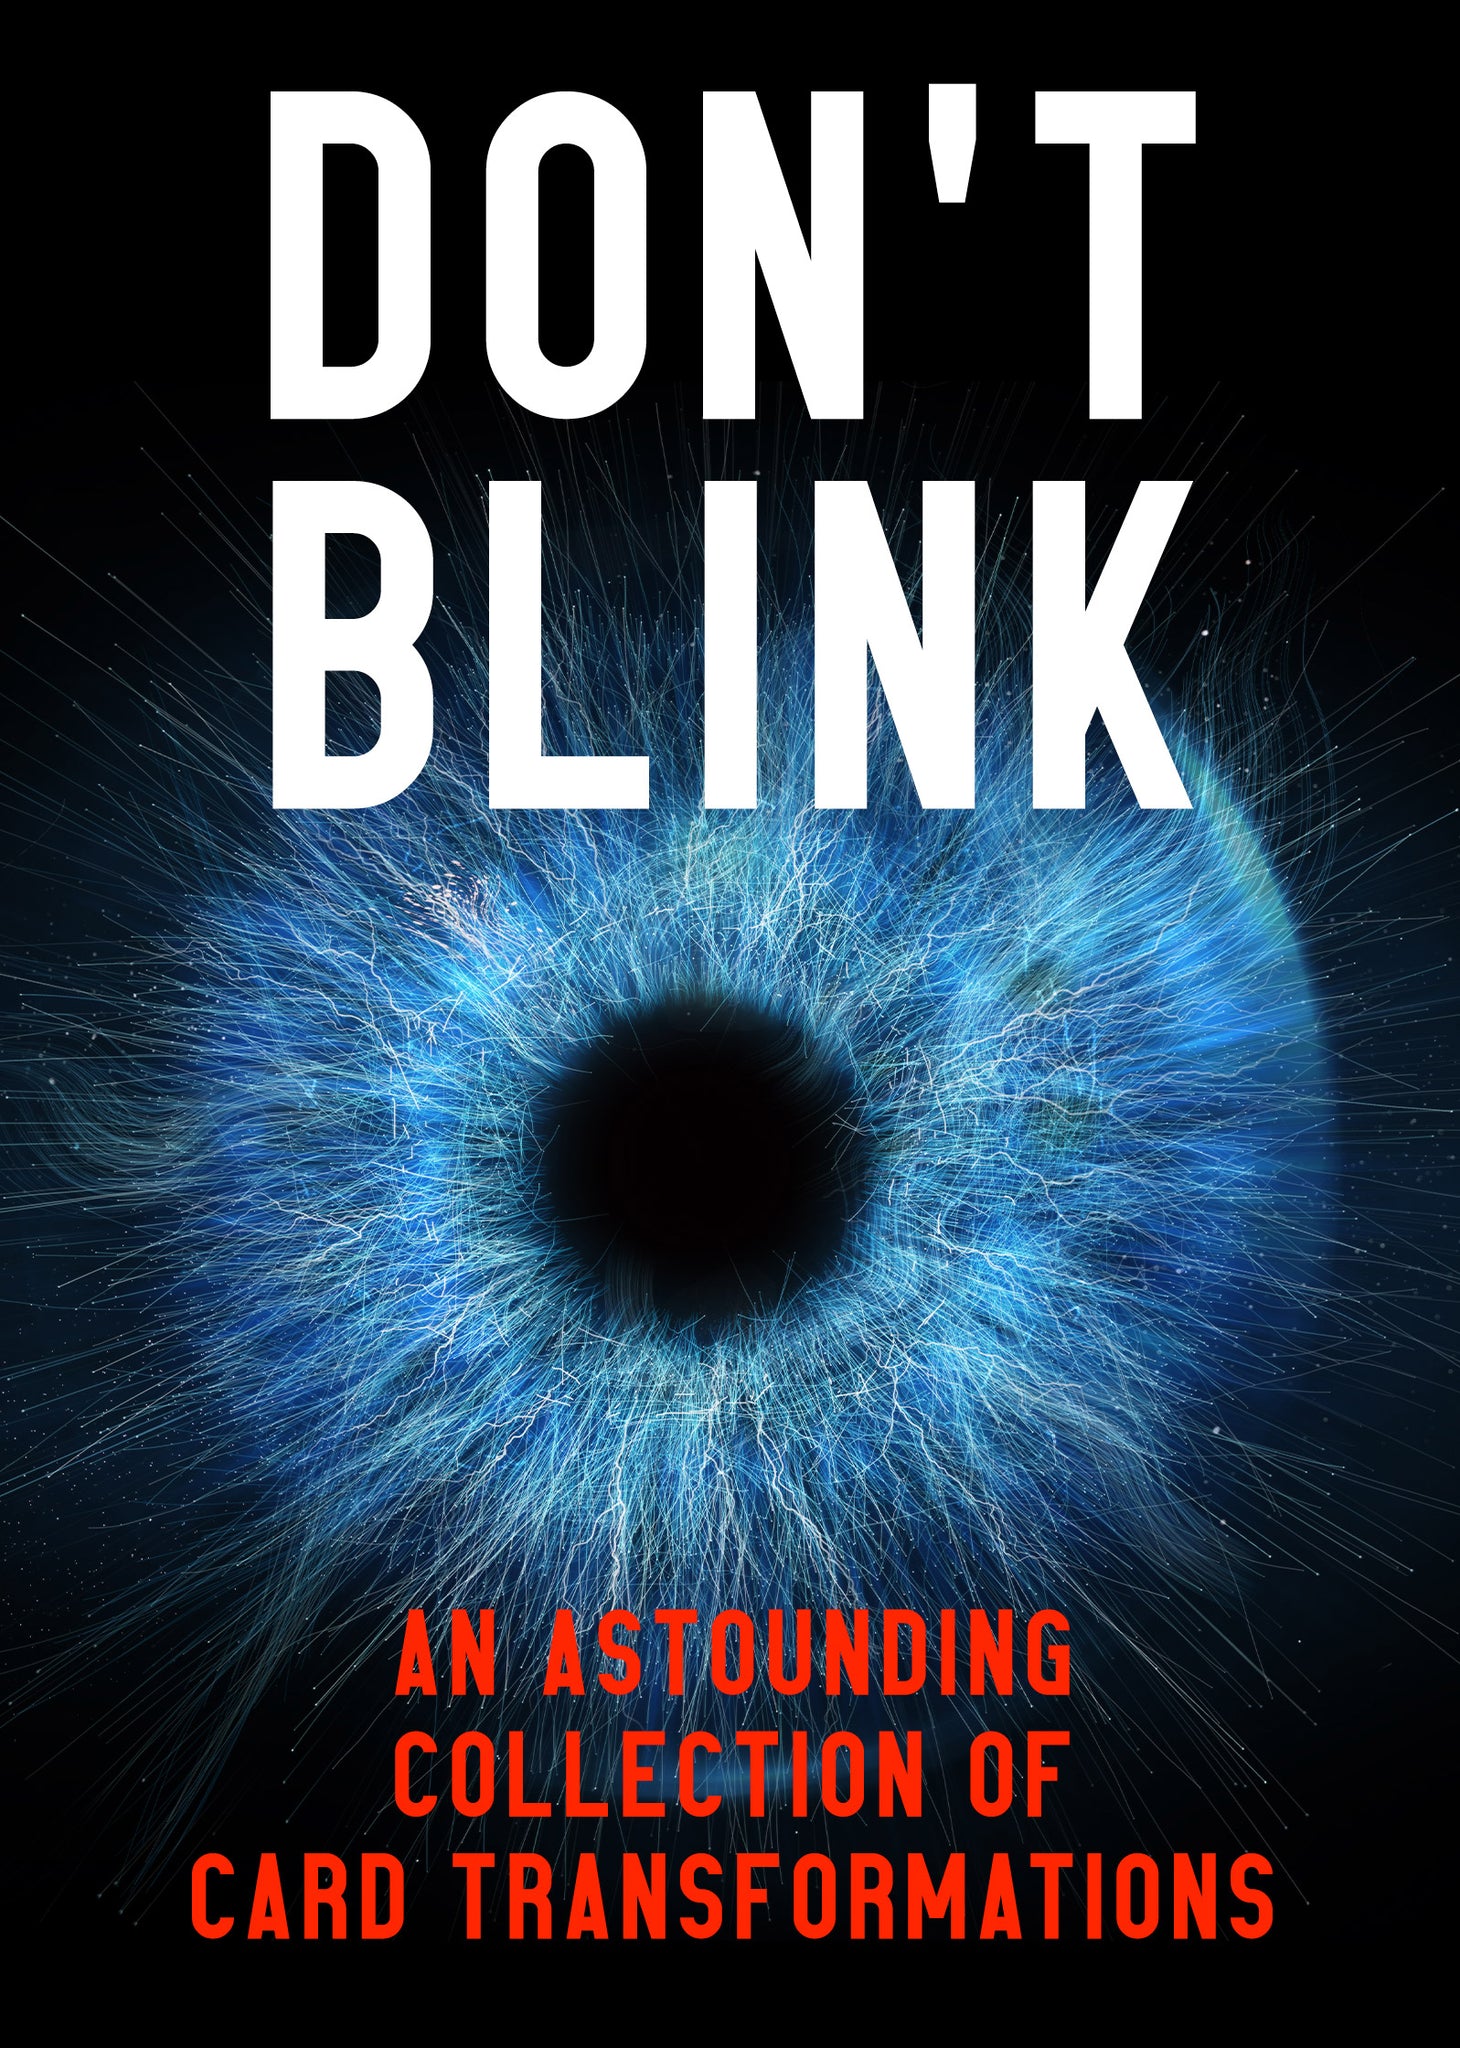 DON'T BLINK COLLECTION